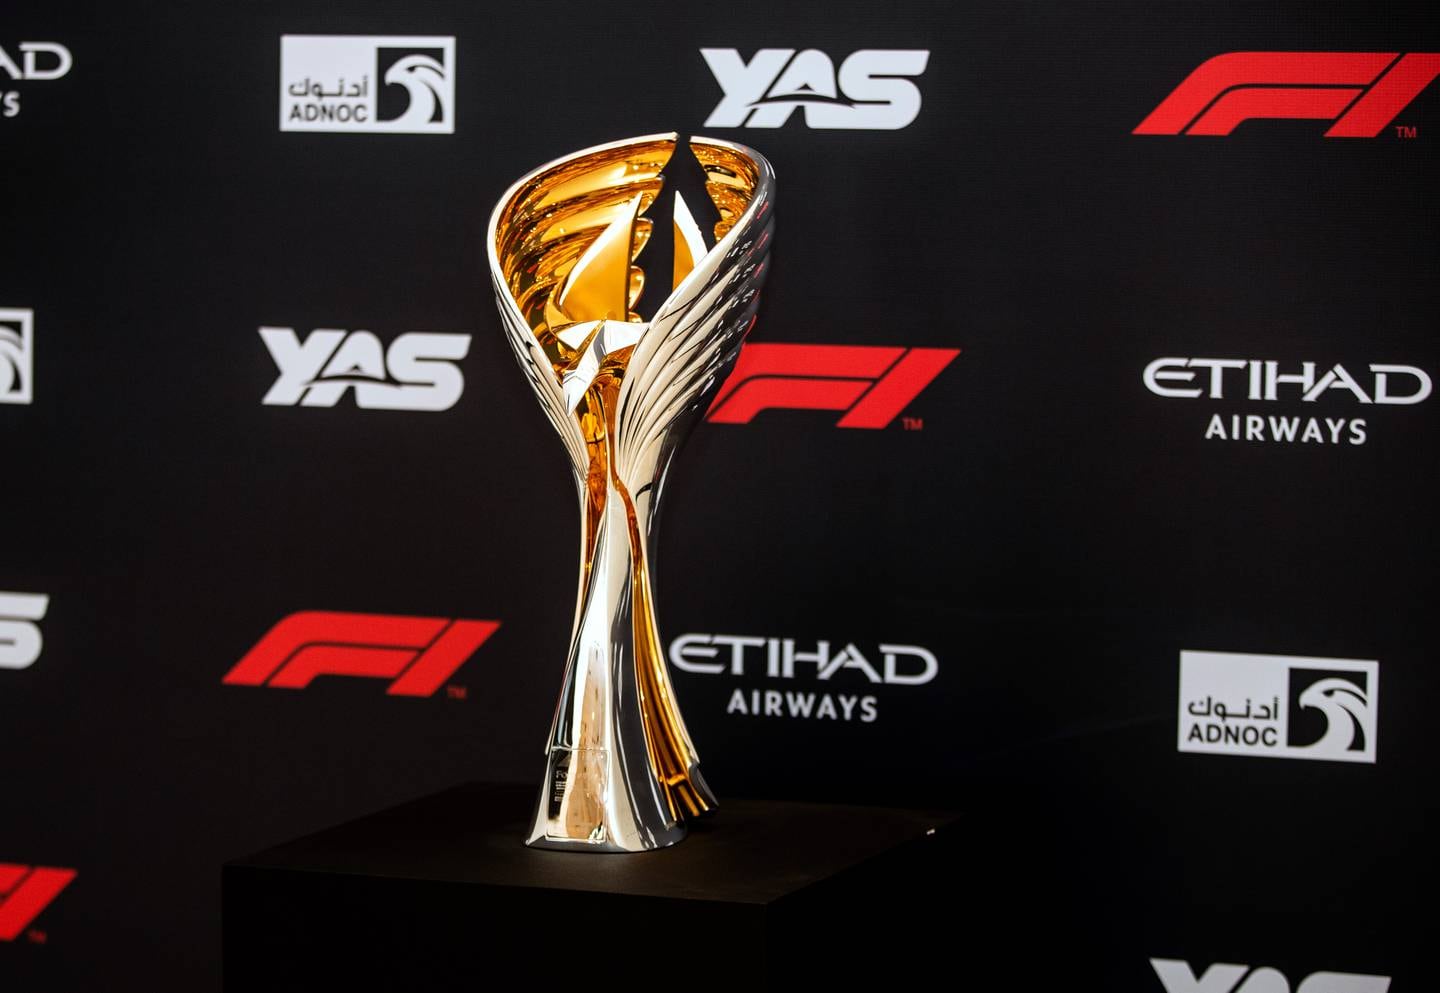 The Abu Dhabi GP trophy on display during the 2022 global ticket launch at the Yas Marina Conference Centre in Abu Dhabi. Victor Besa / The National